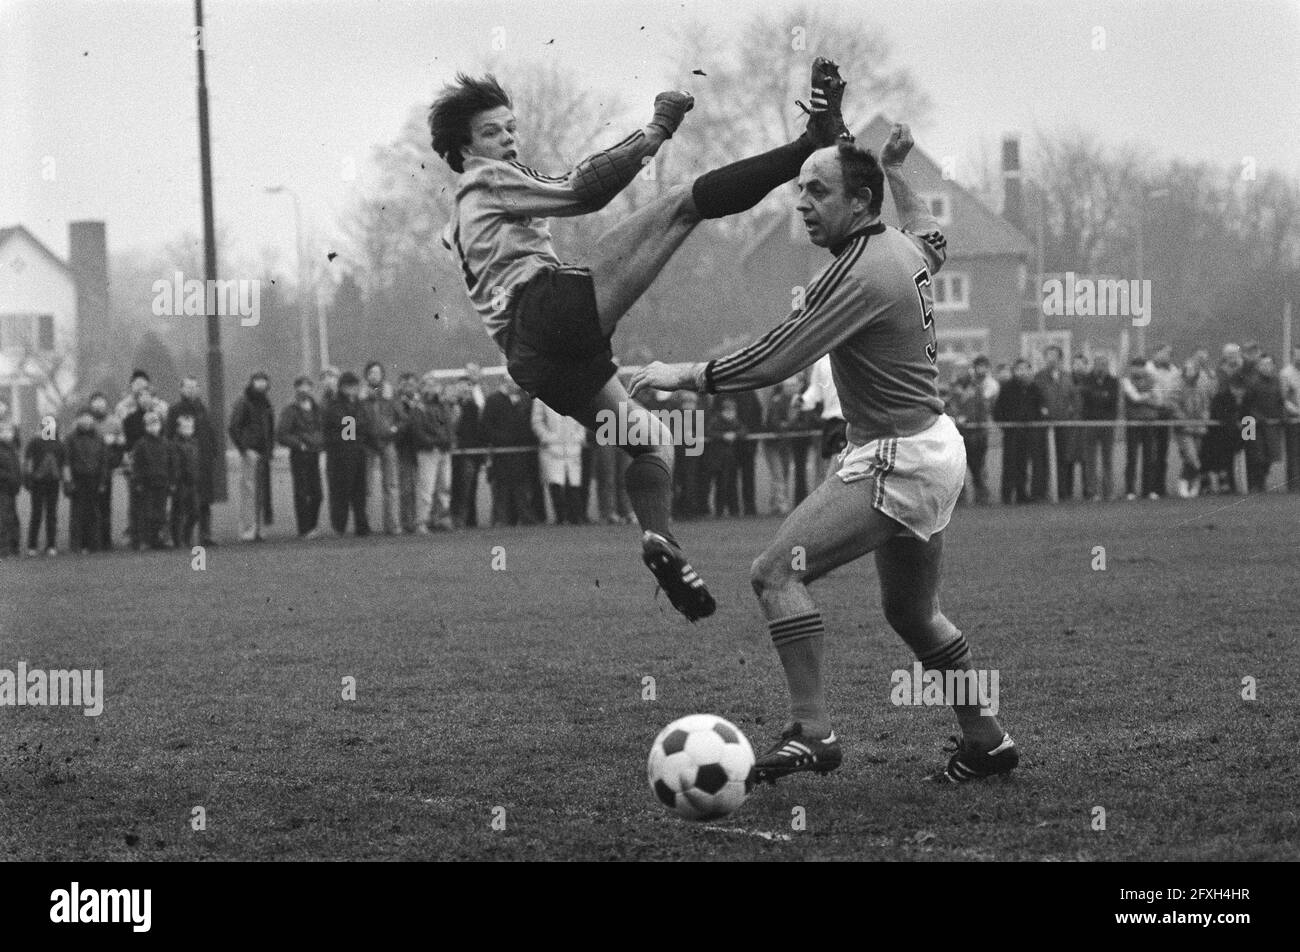 Soccer between KHFC against former internationals in Haarlem. Leen van der Lugt (r.) with KHFC goalkeeper H. van Nee, January 1, 1982, sports, soccer New Year's Eve, The Netherlands, 20th century press agency photo, news to remember, documentary, historic photography 1945-1990, visual stories, human history of the Twentieth Century, capturing moments in time Stock Photo